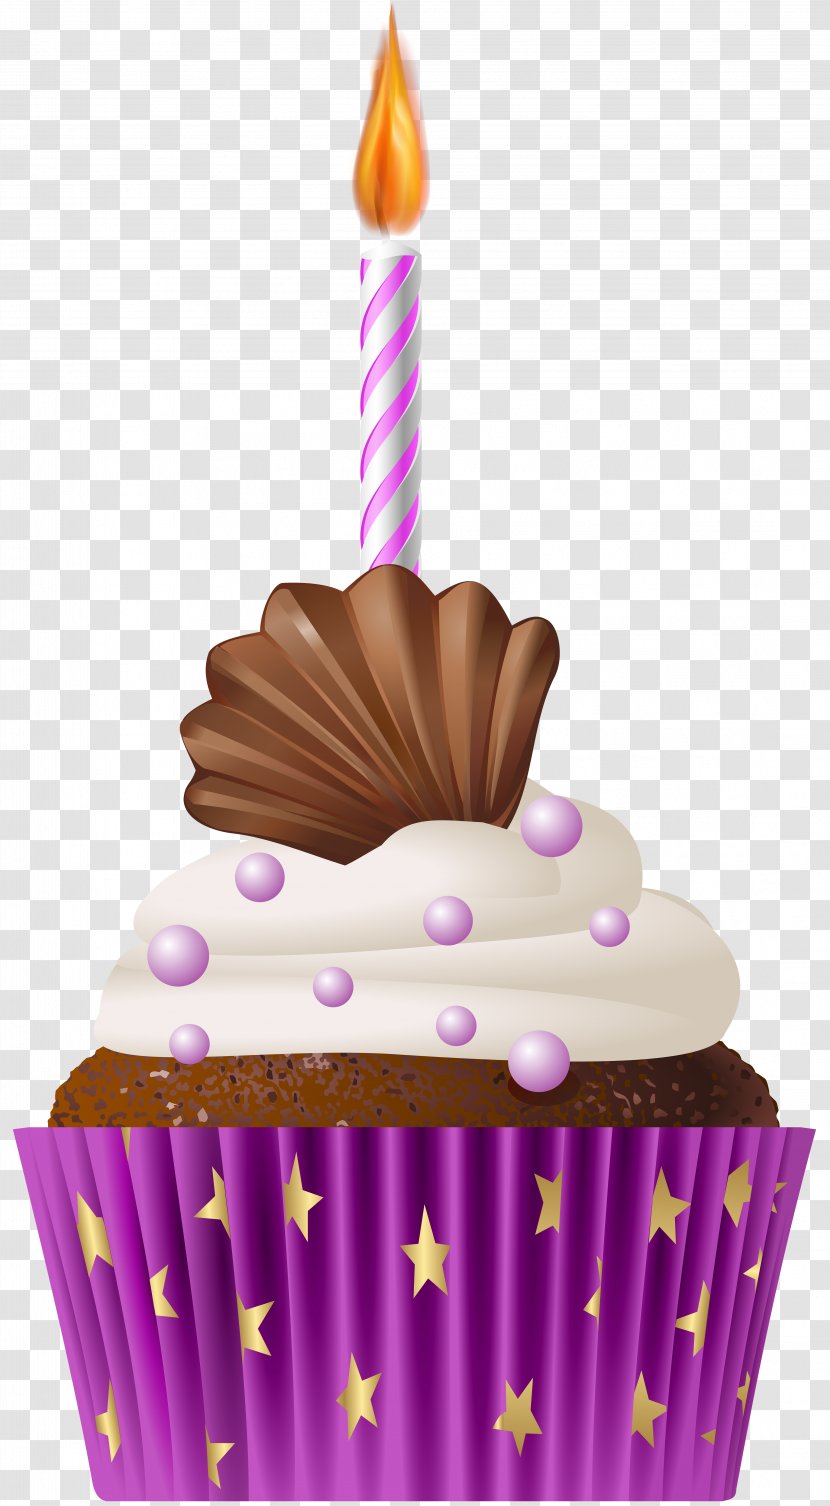 Muffin Cupcake Birthday Cake Clip Art - Pink With Candle Transparent PNG